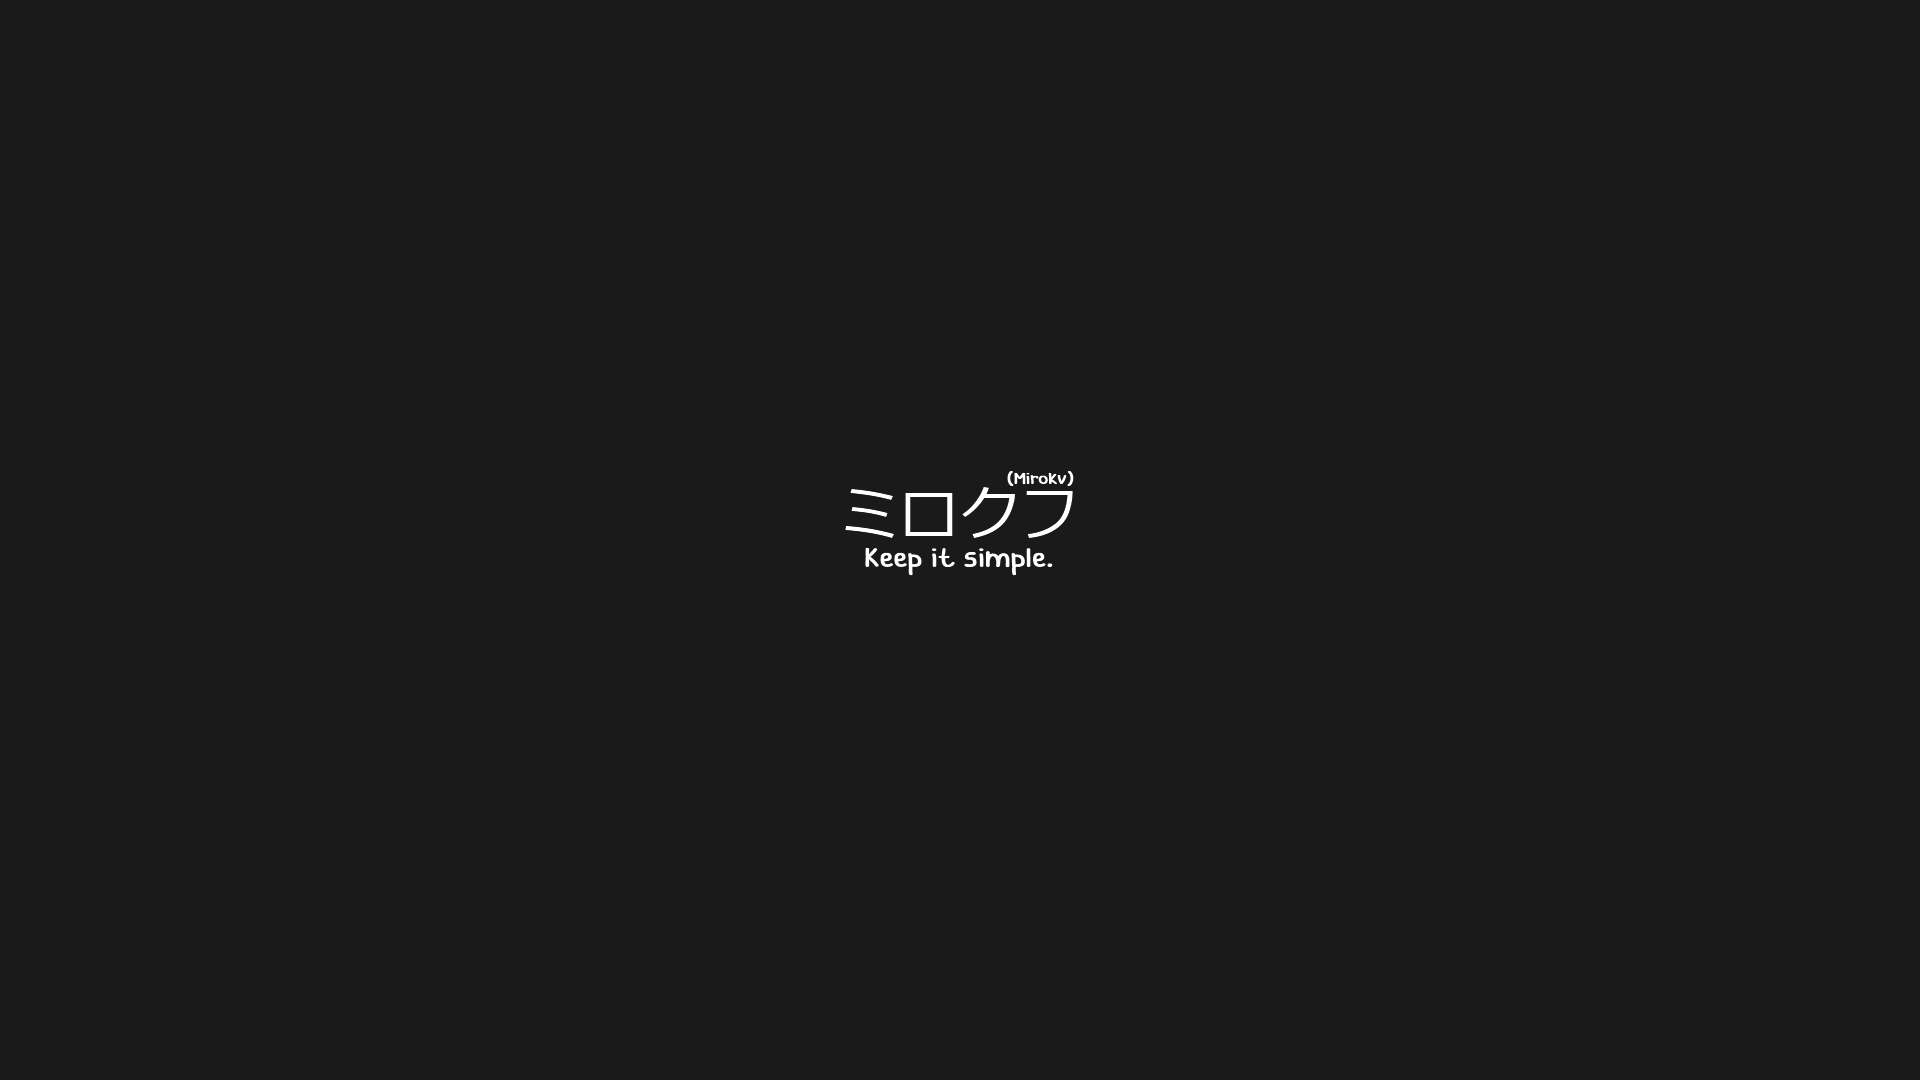 Japanese, Keep it simple, Translated, Simple background, Black background Wallpaper